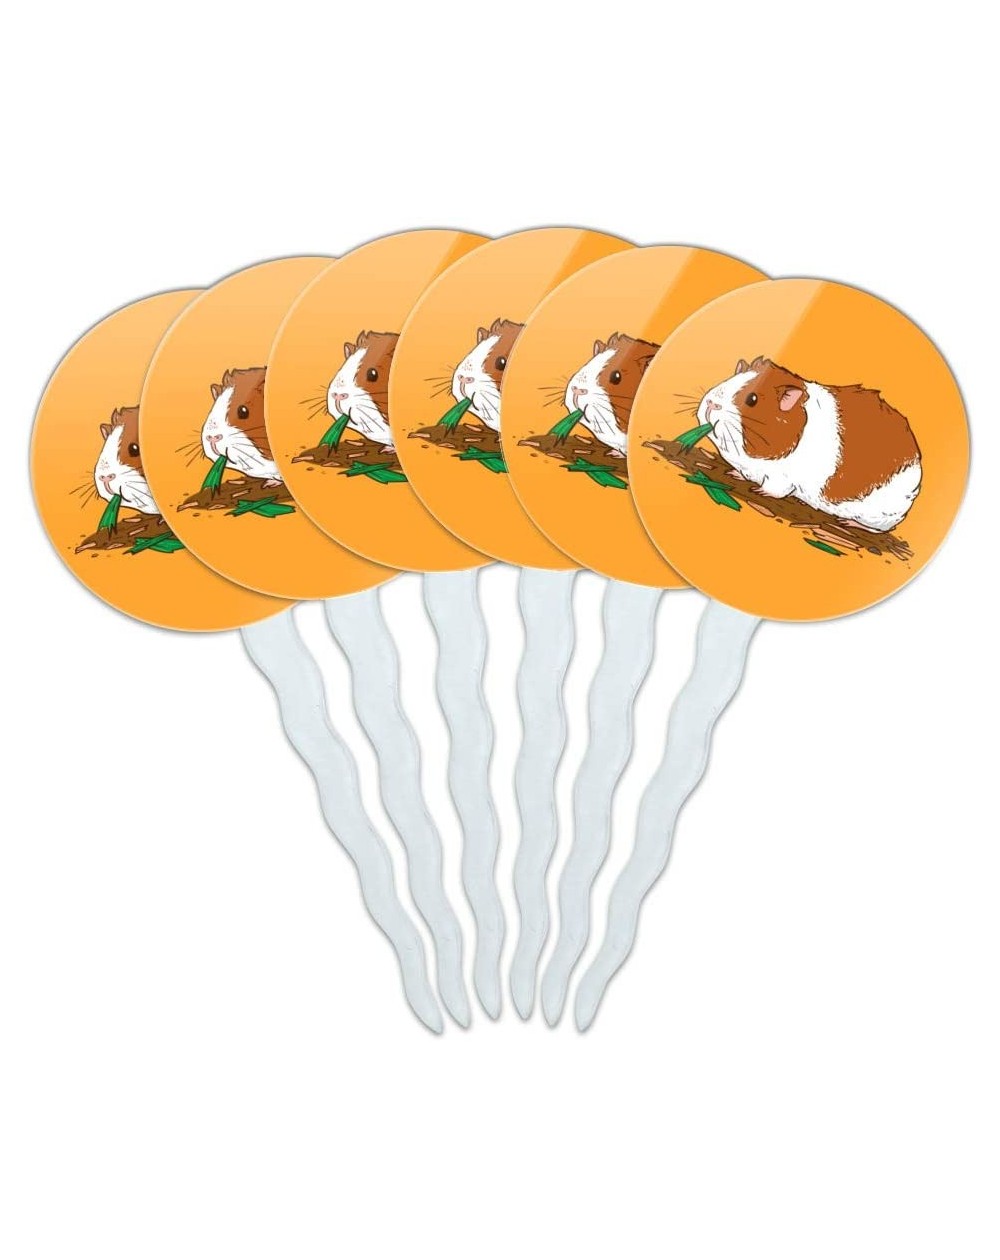 Cake & Cupcake Toppers Guinea Pig Eating Cupcake Picks Toppers Decoration Set of 6 - CZ189TMG8Q0 $9.41